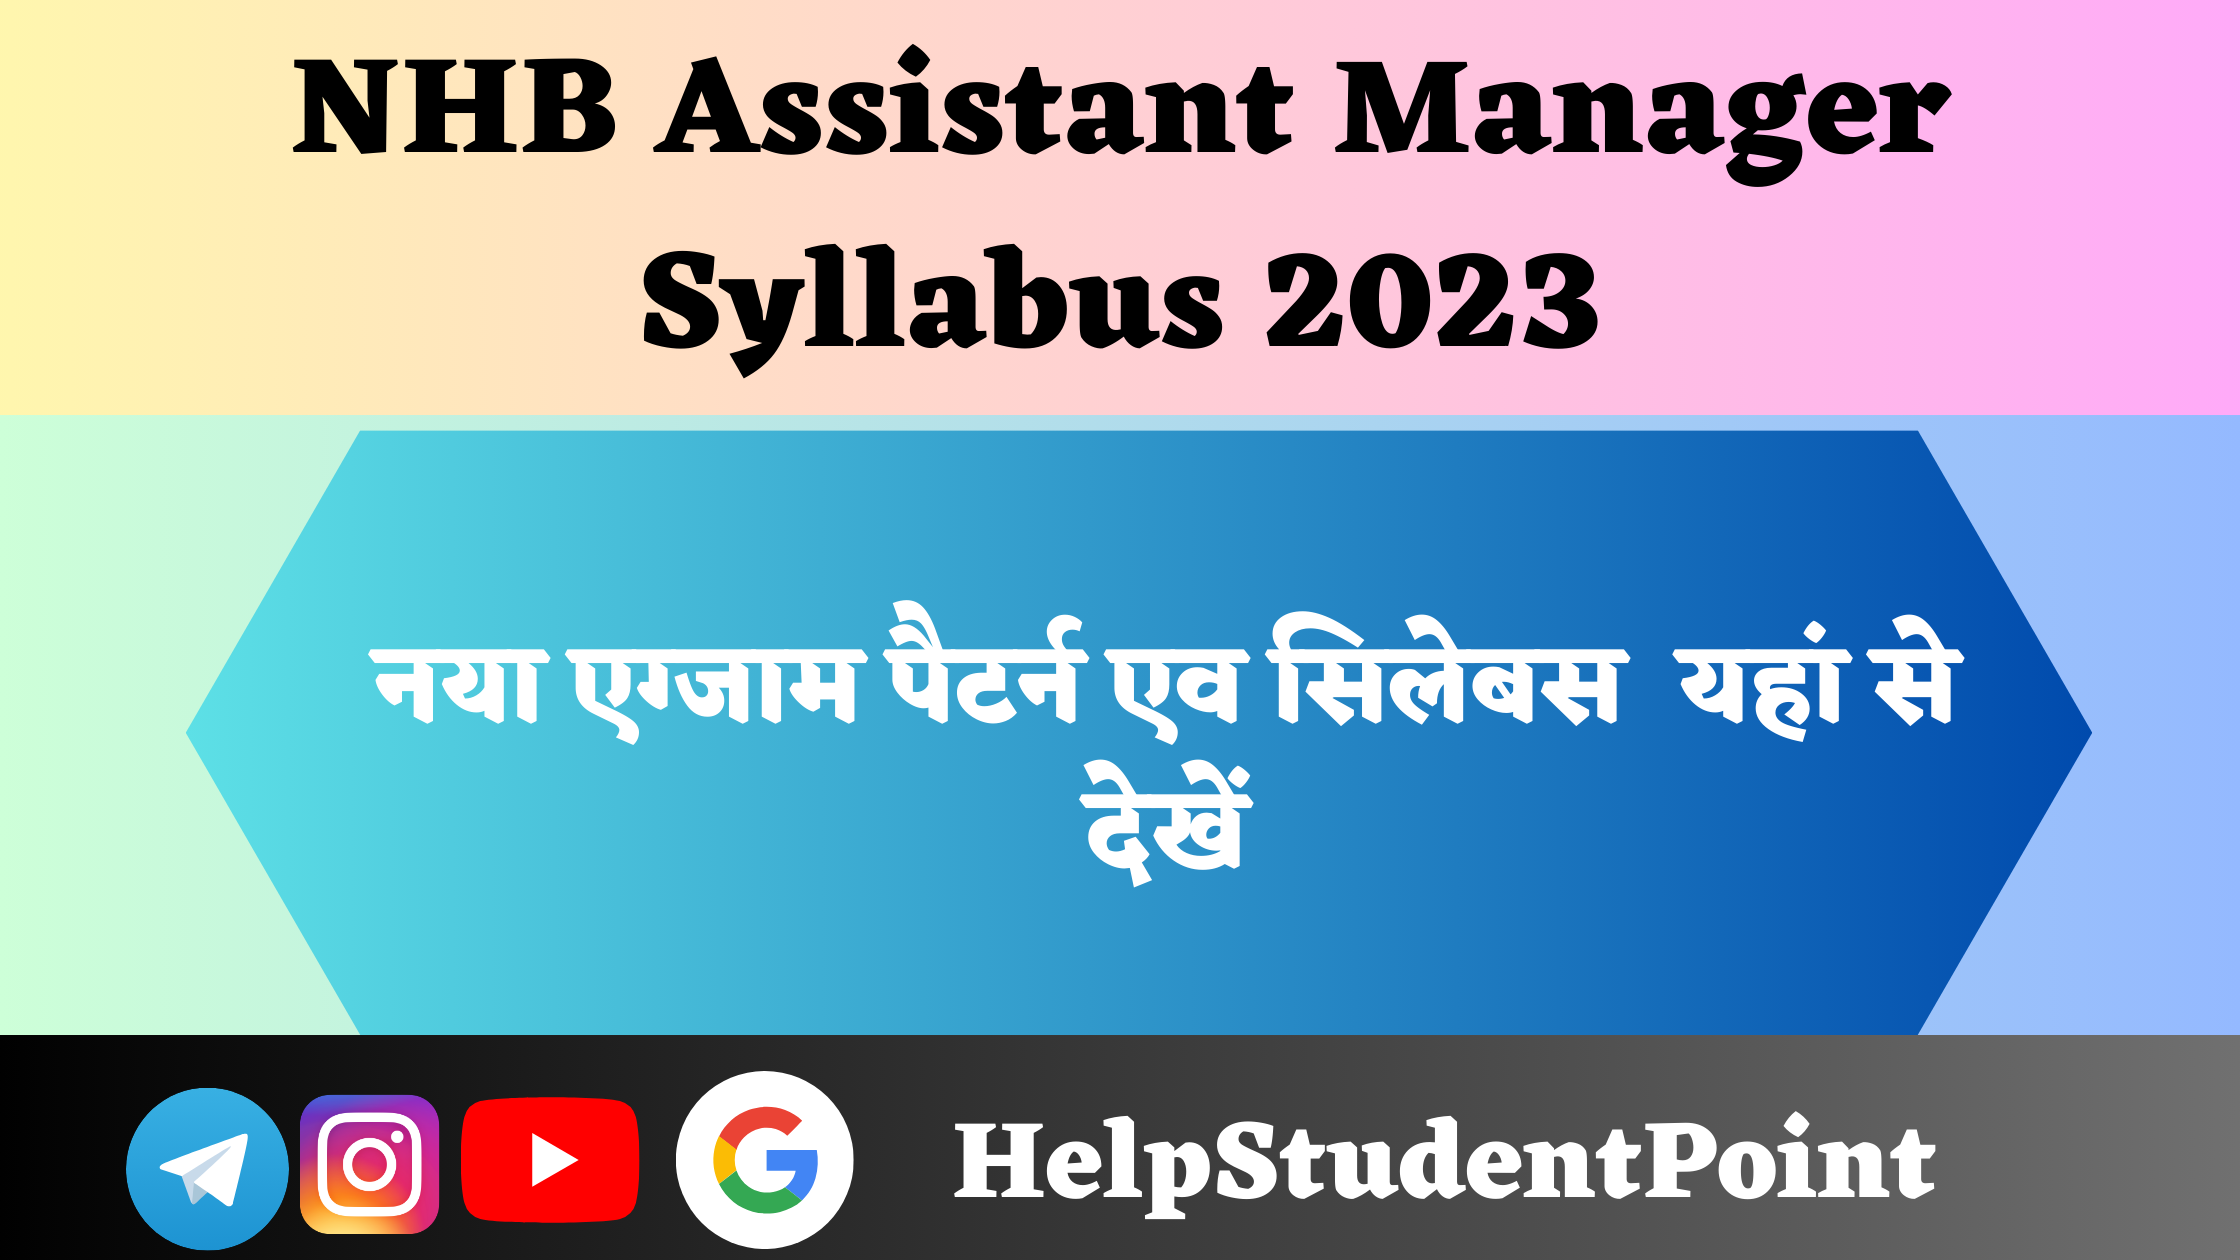 NHB Assistant Manager Syllabus 2023